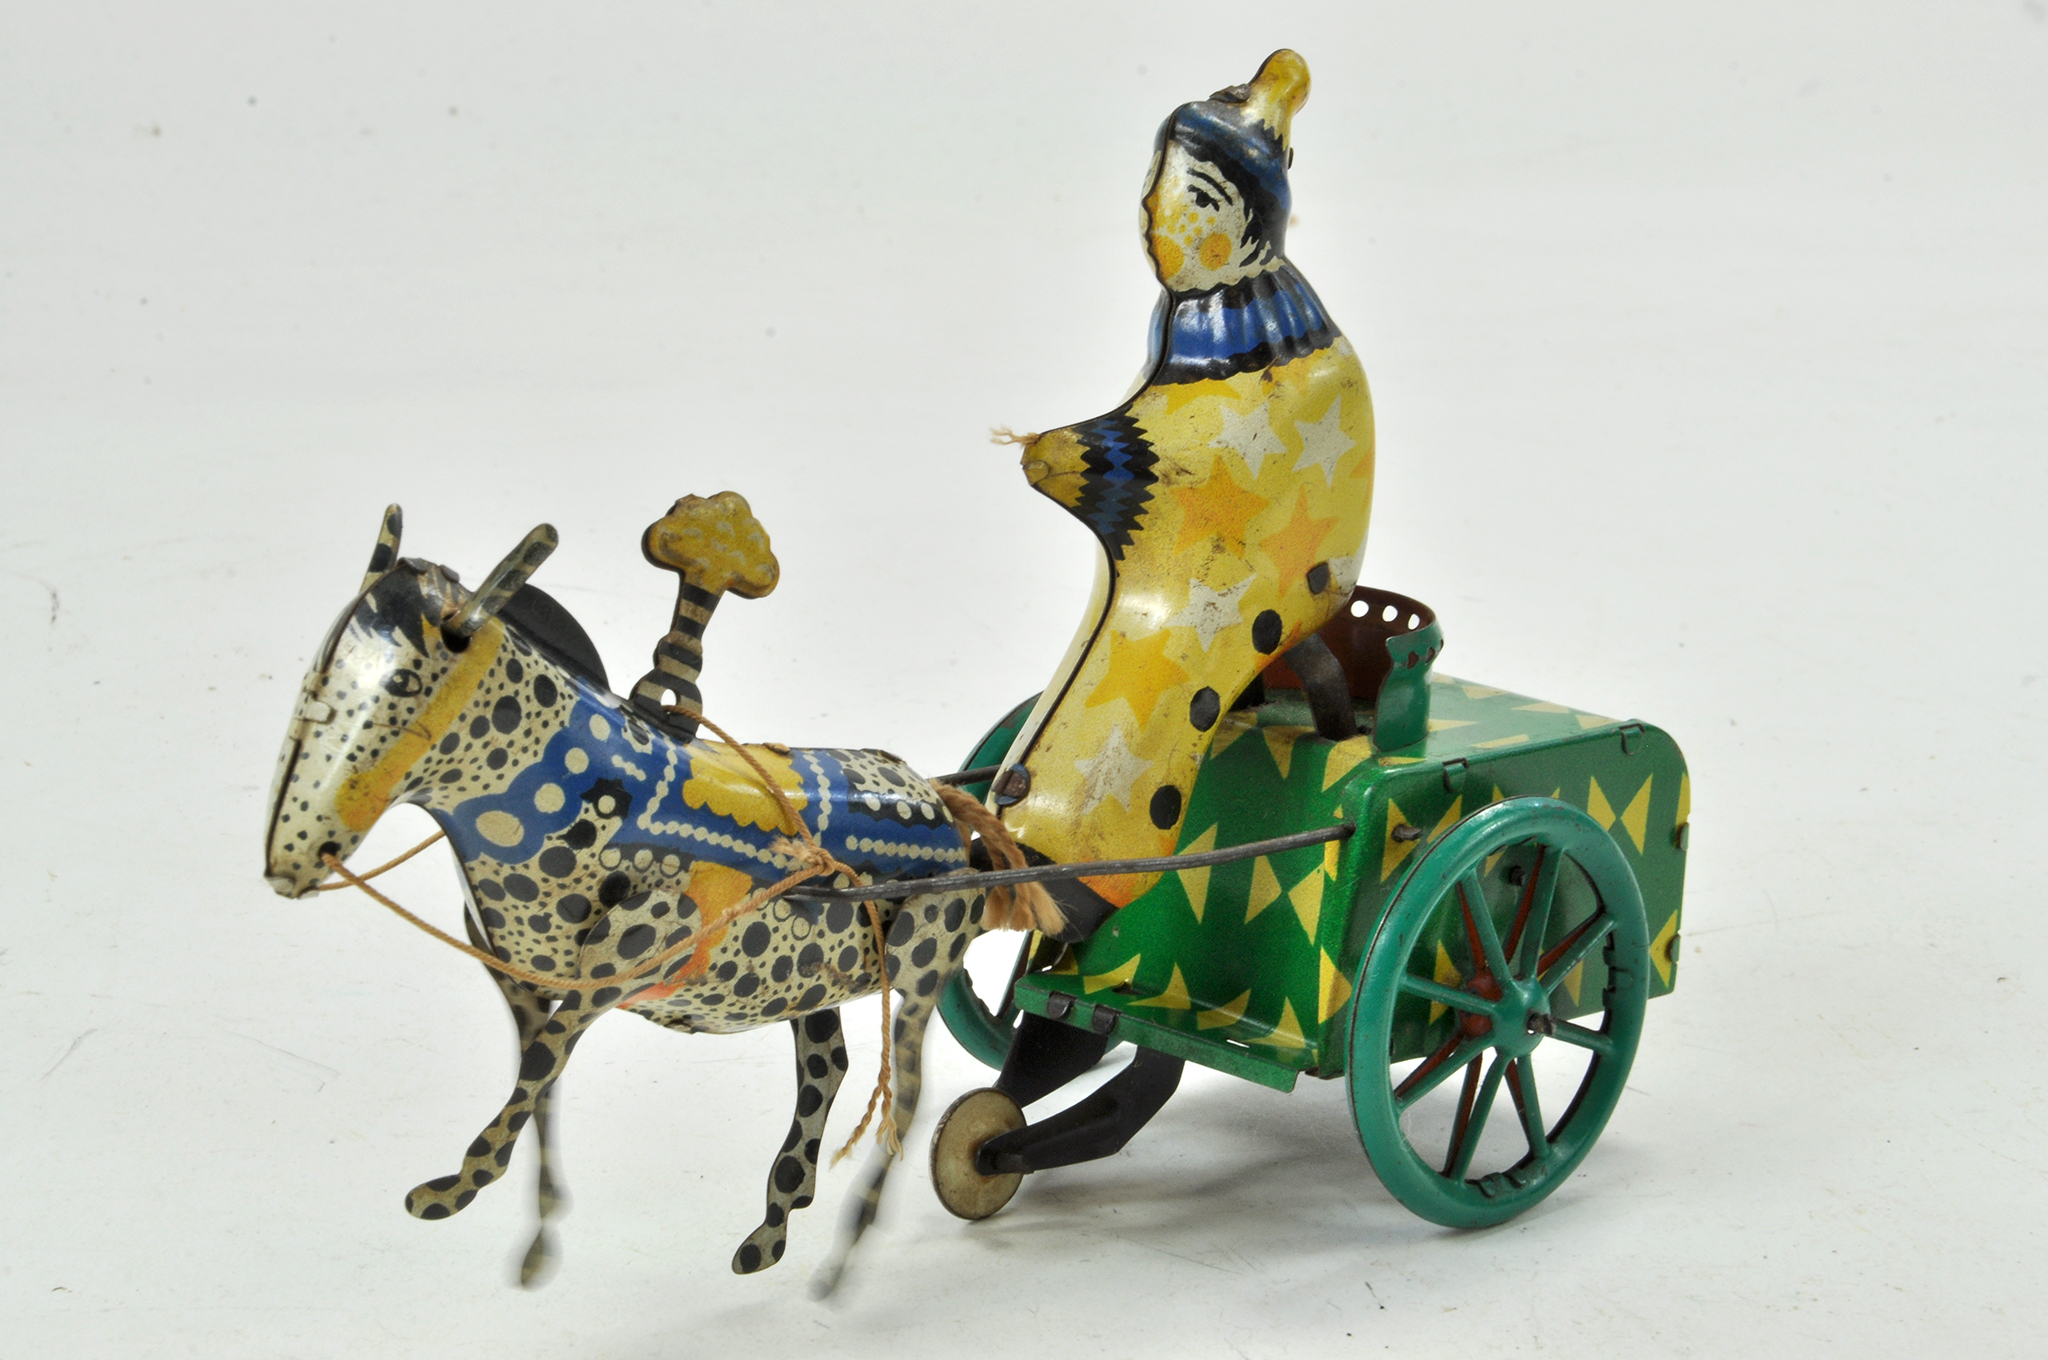 Interesting German Mechanical Wind Up Tinplate Circus Clown and Performing Pony / Donkey?